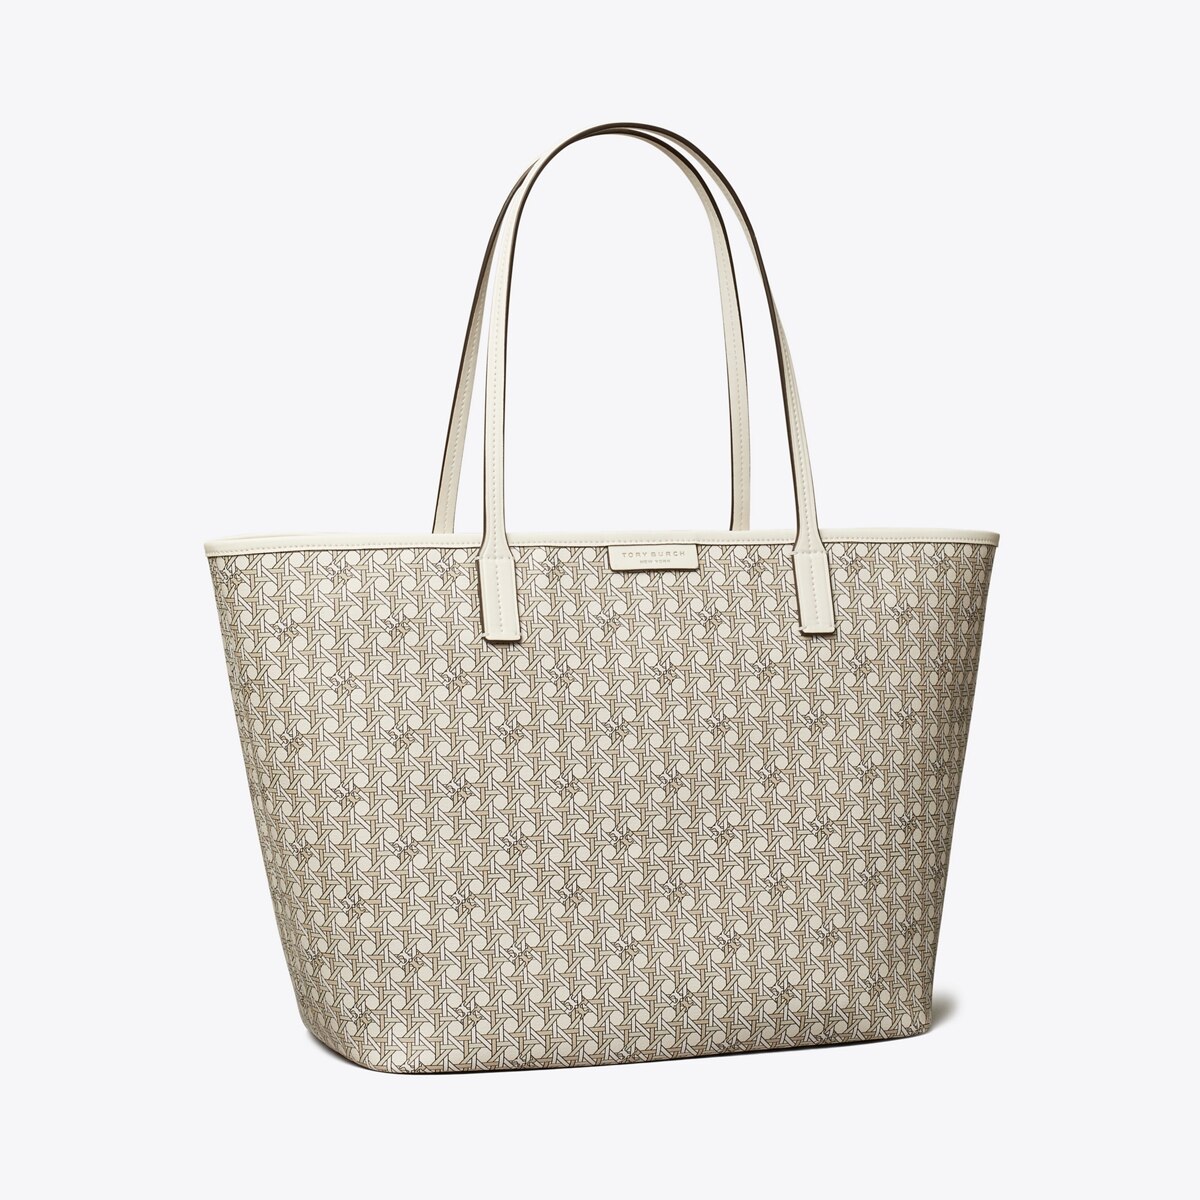 COATED CANVAS SMALL TOTE BAG for Women - Tory Burch sale